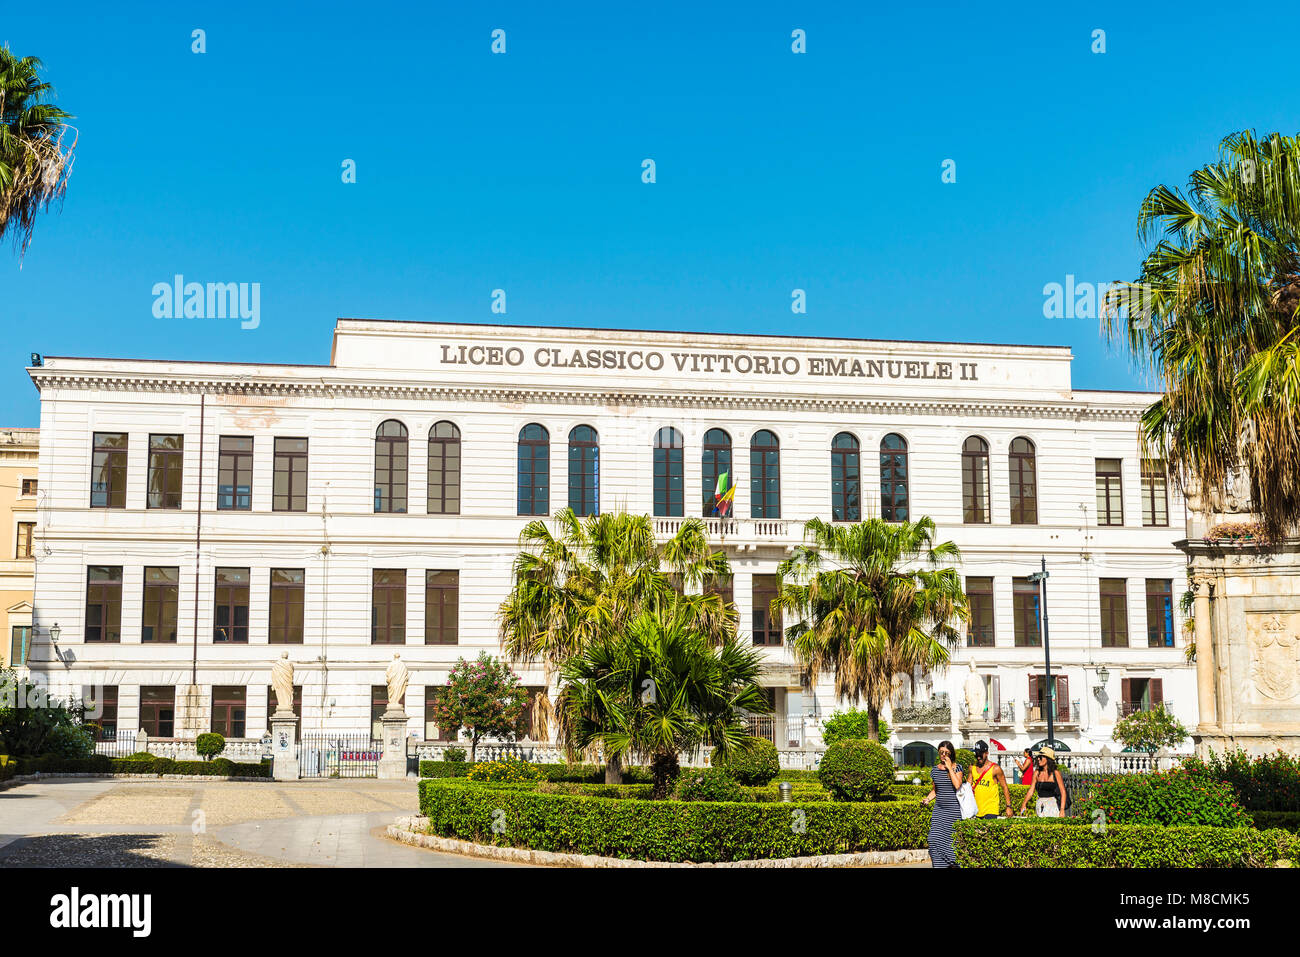 Palermo, Italy - August 10, 2017: Facade of the Liceo Classico Vittorio Emanuele II with people around in the center of Palermo in Sicily, Italy Stock Photo